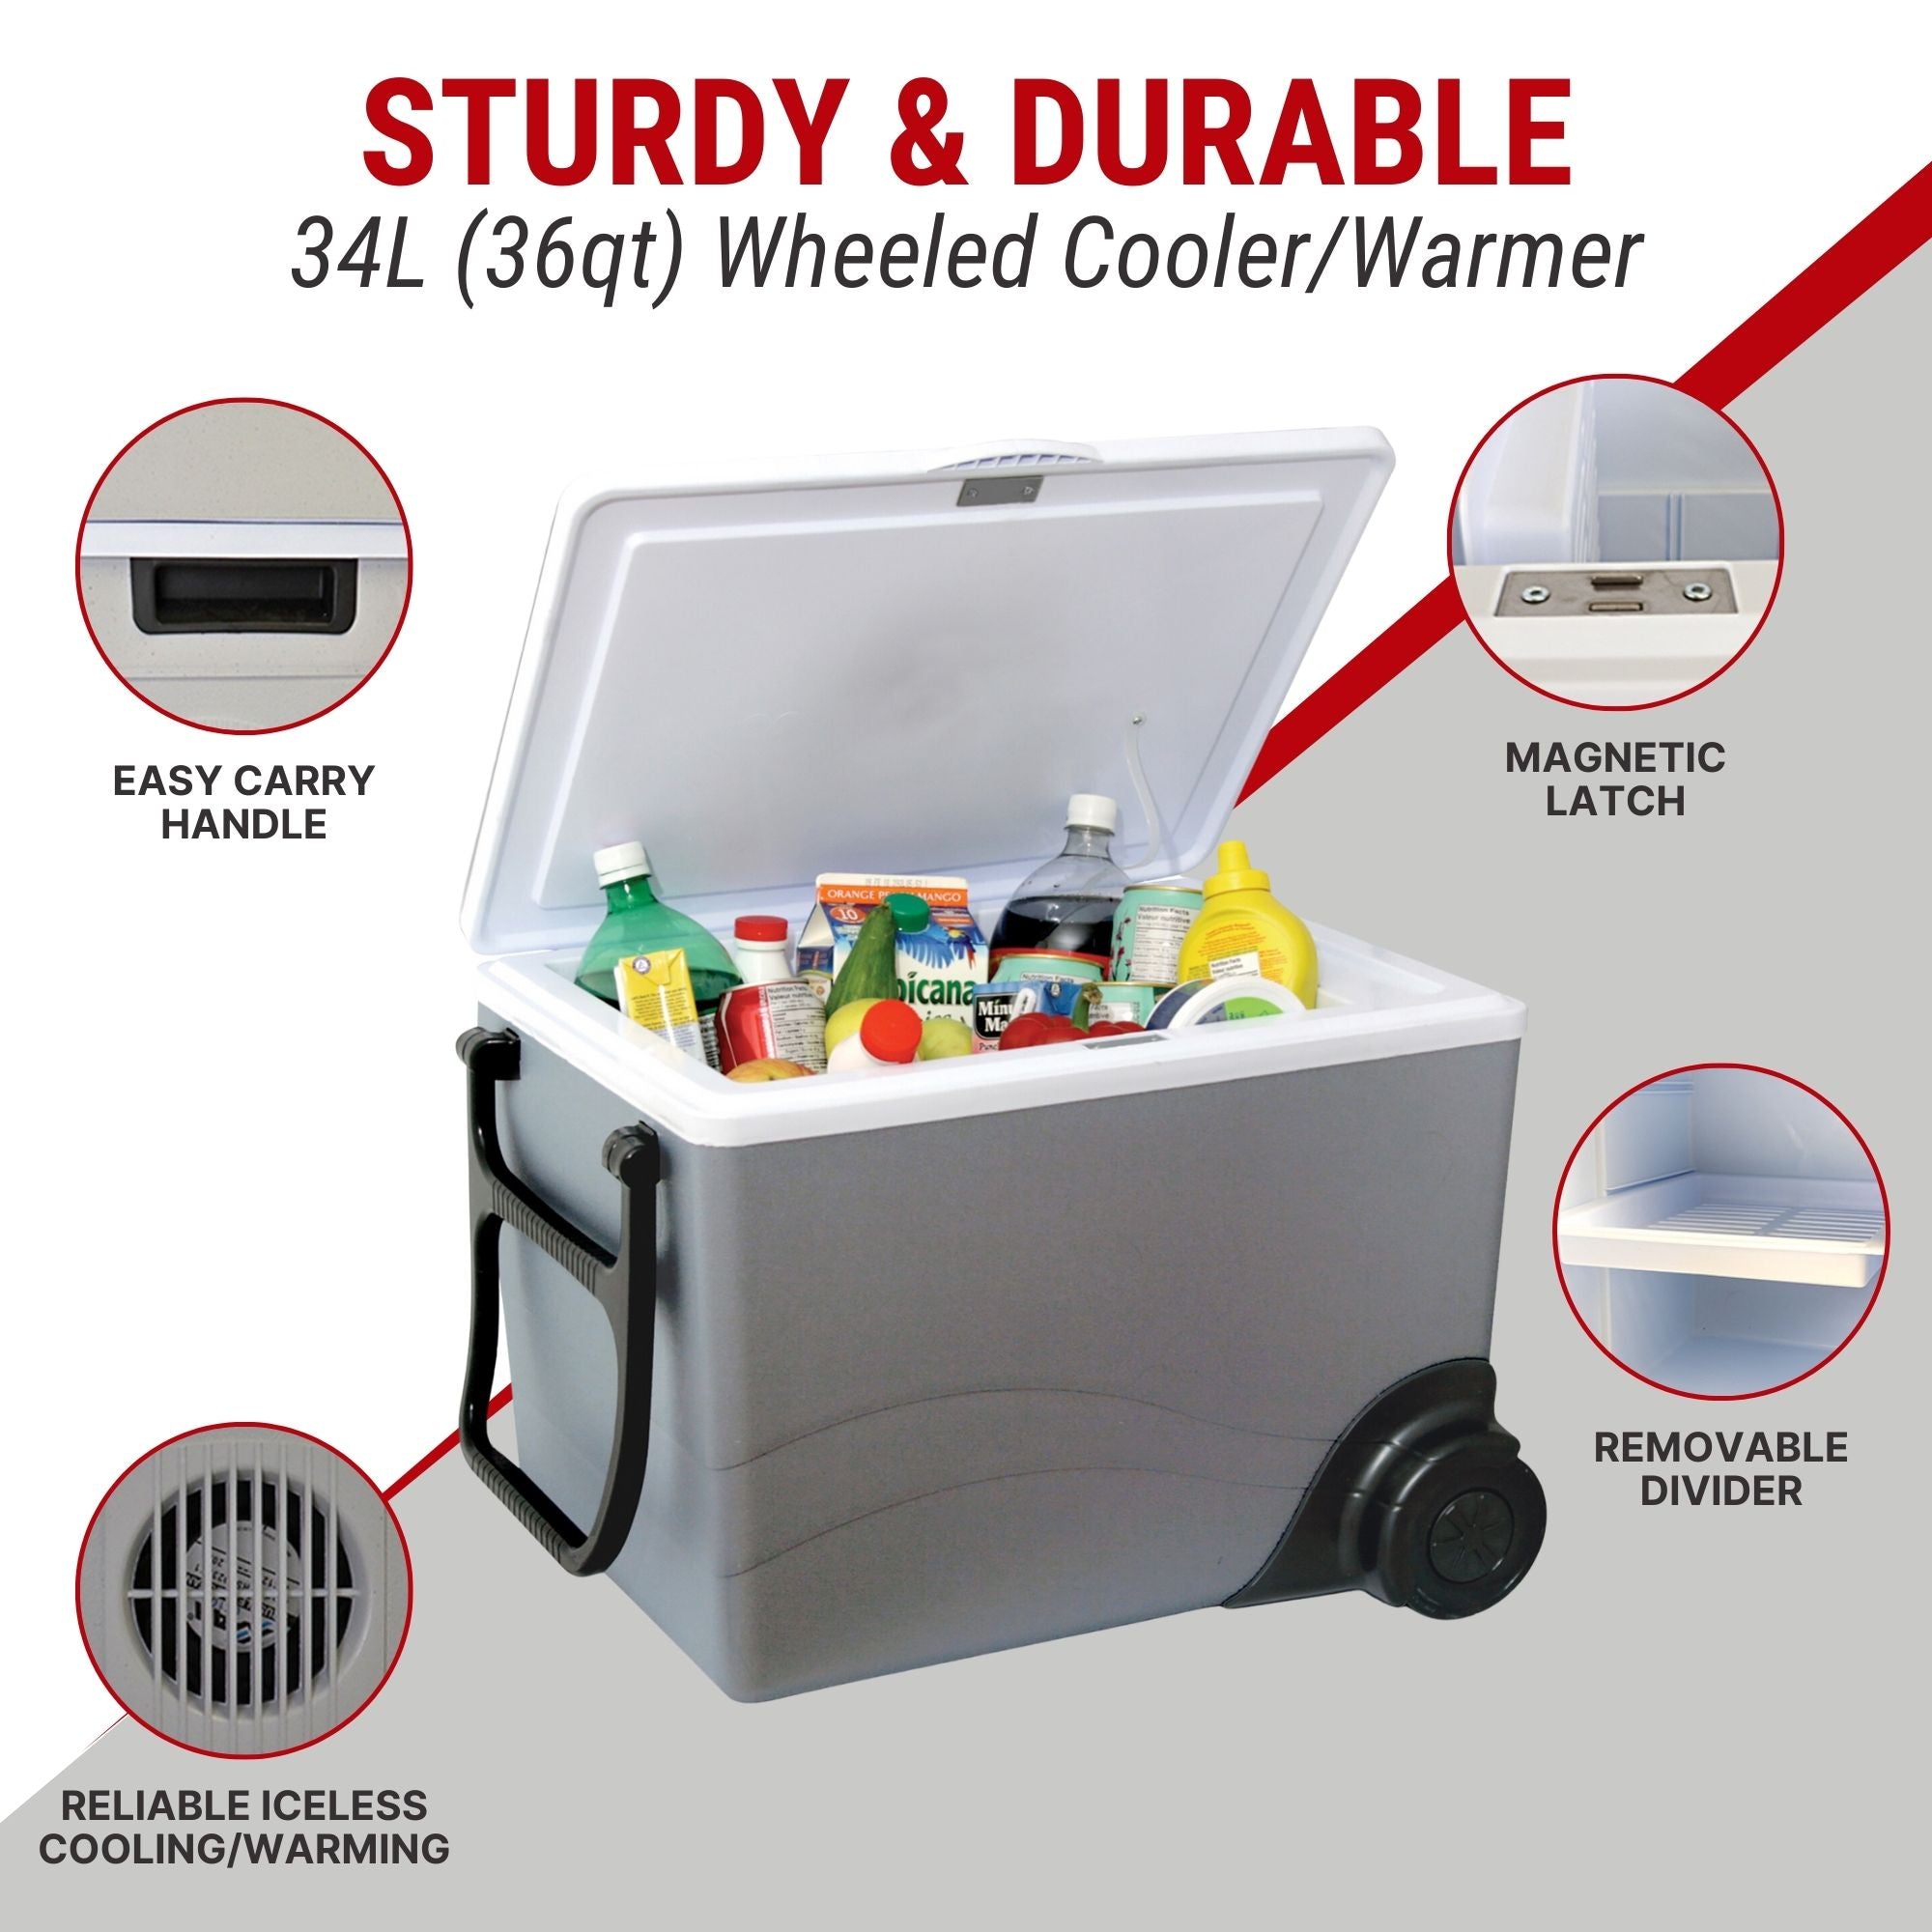 Koolatron 12V cooler/warmer open with food inside surrounded by closeup images of features, labeled: Reliable iceless cooling/warming; easy carry handle; magnetic latch; removable divider. Text above reads, "STURDY AND DURABLE 34L (36 qt) wheeled cooler/warmer"